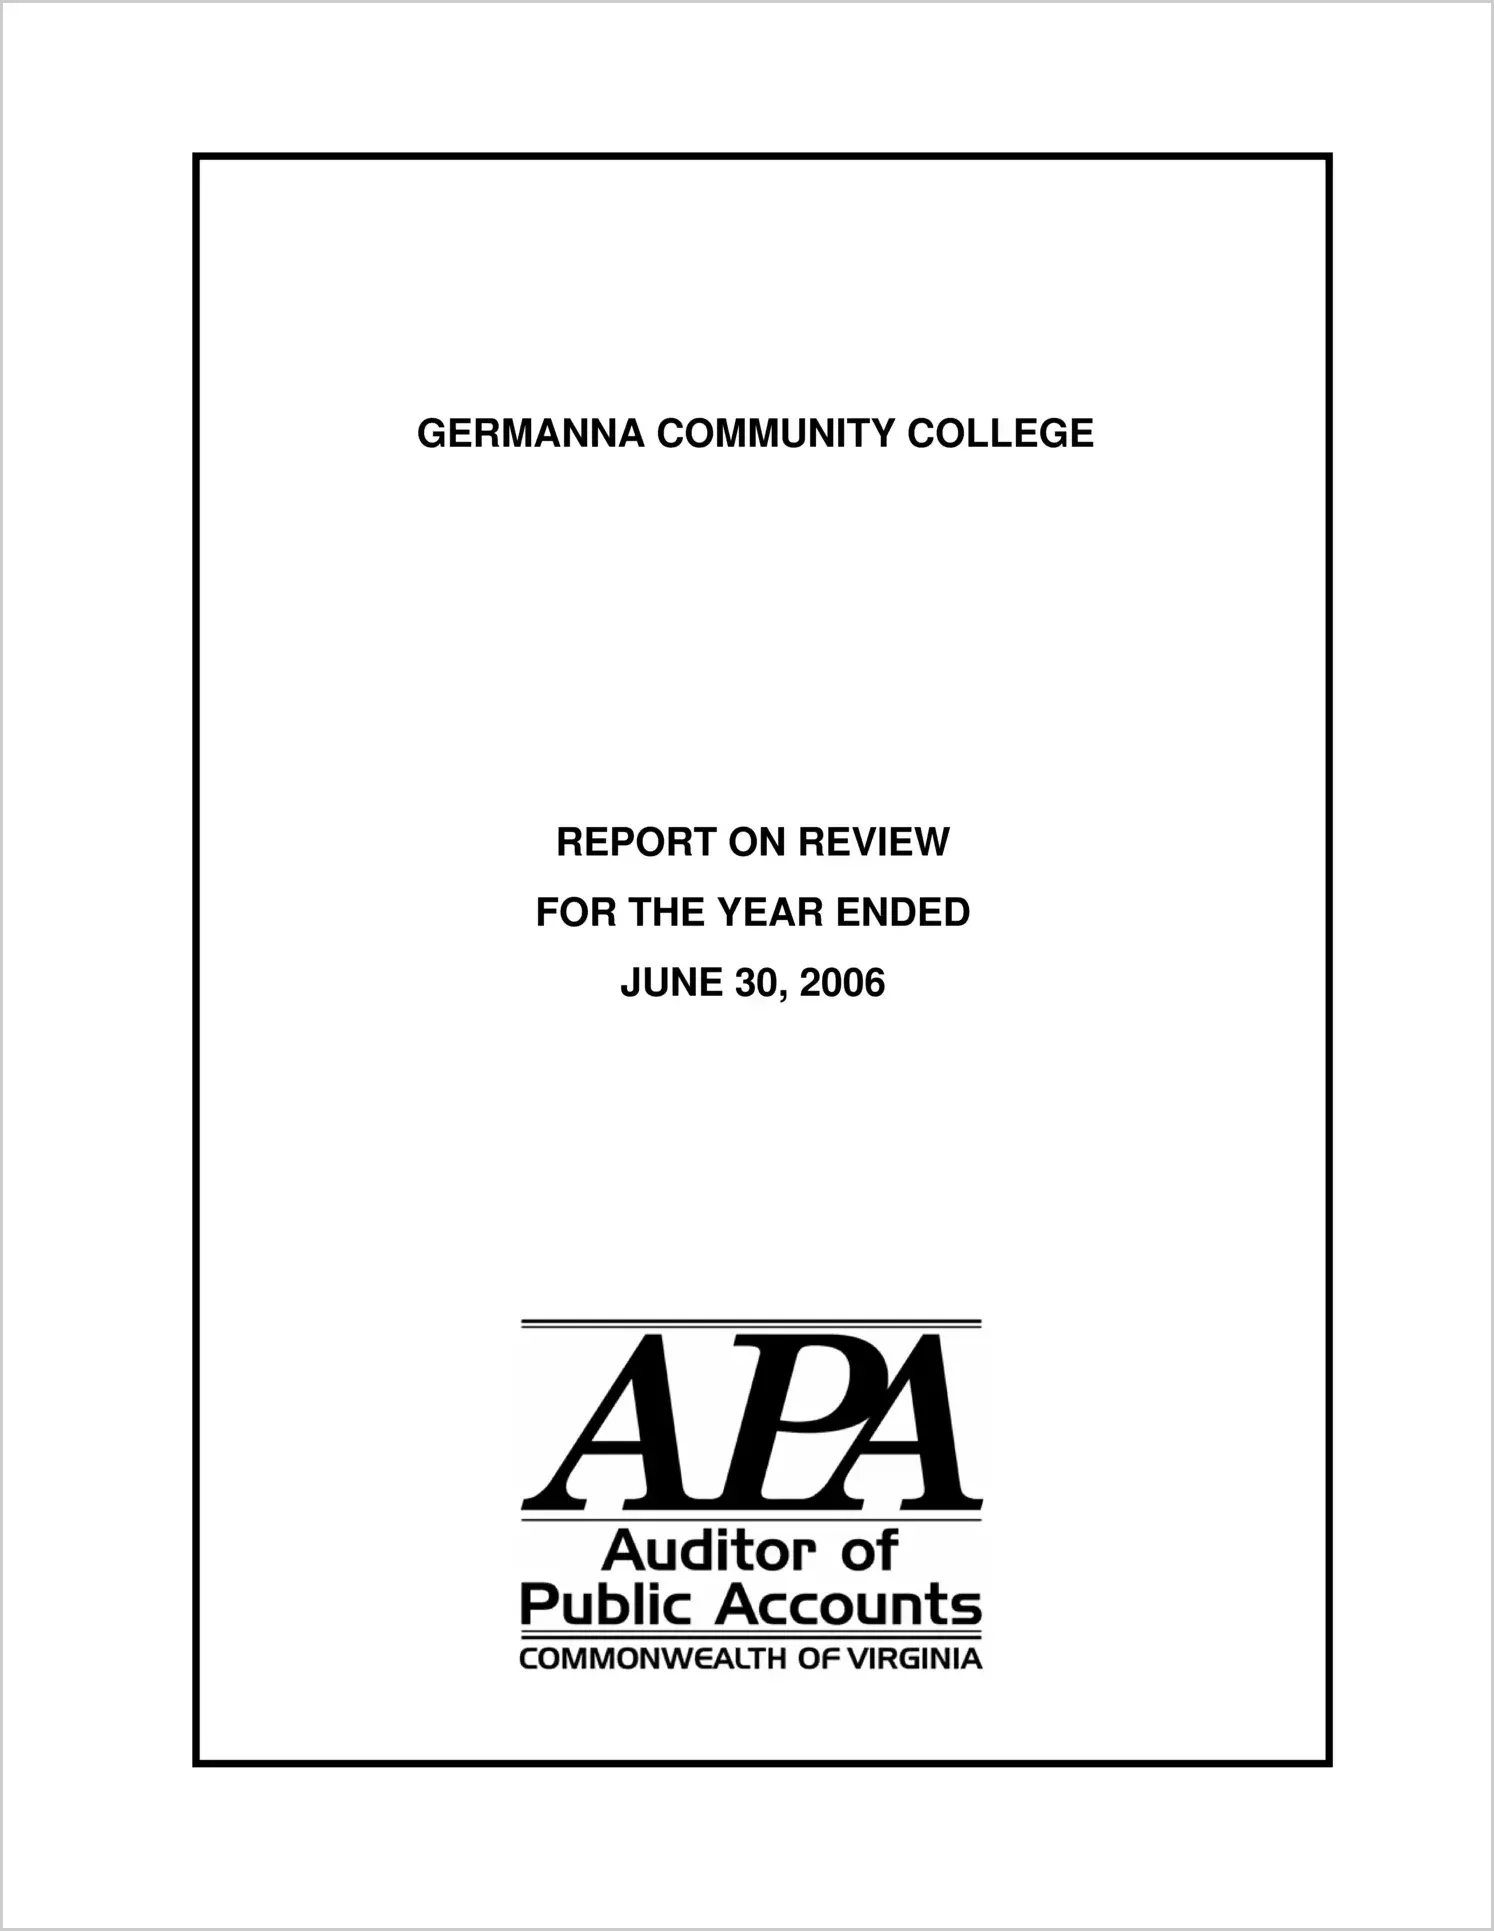 Germanna Community College Report on review for the year ended June 30, 2006